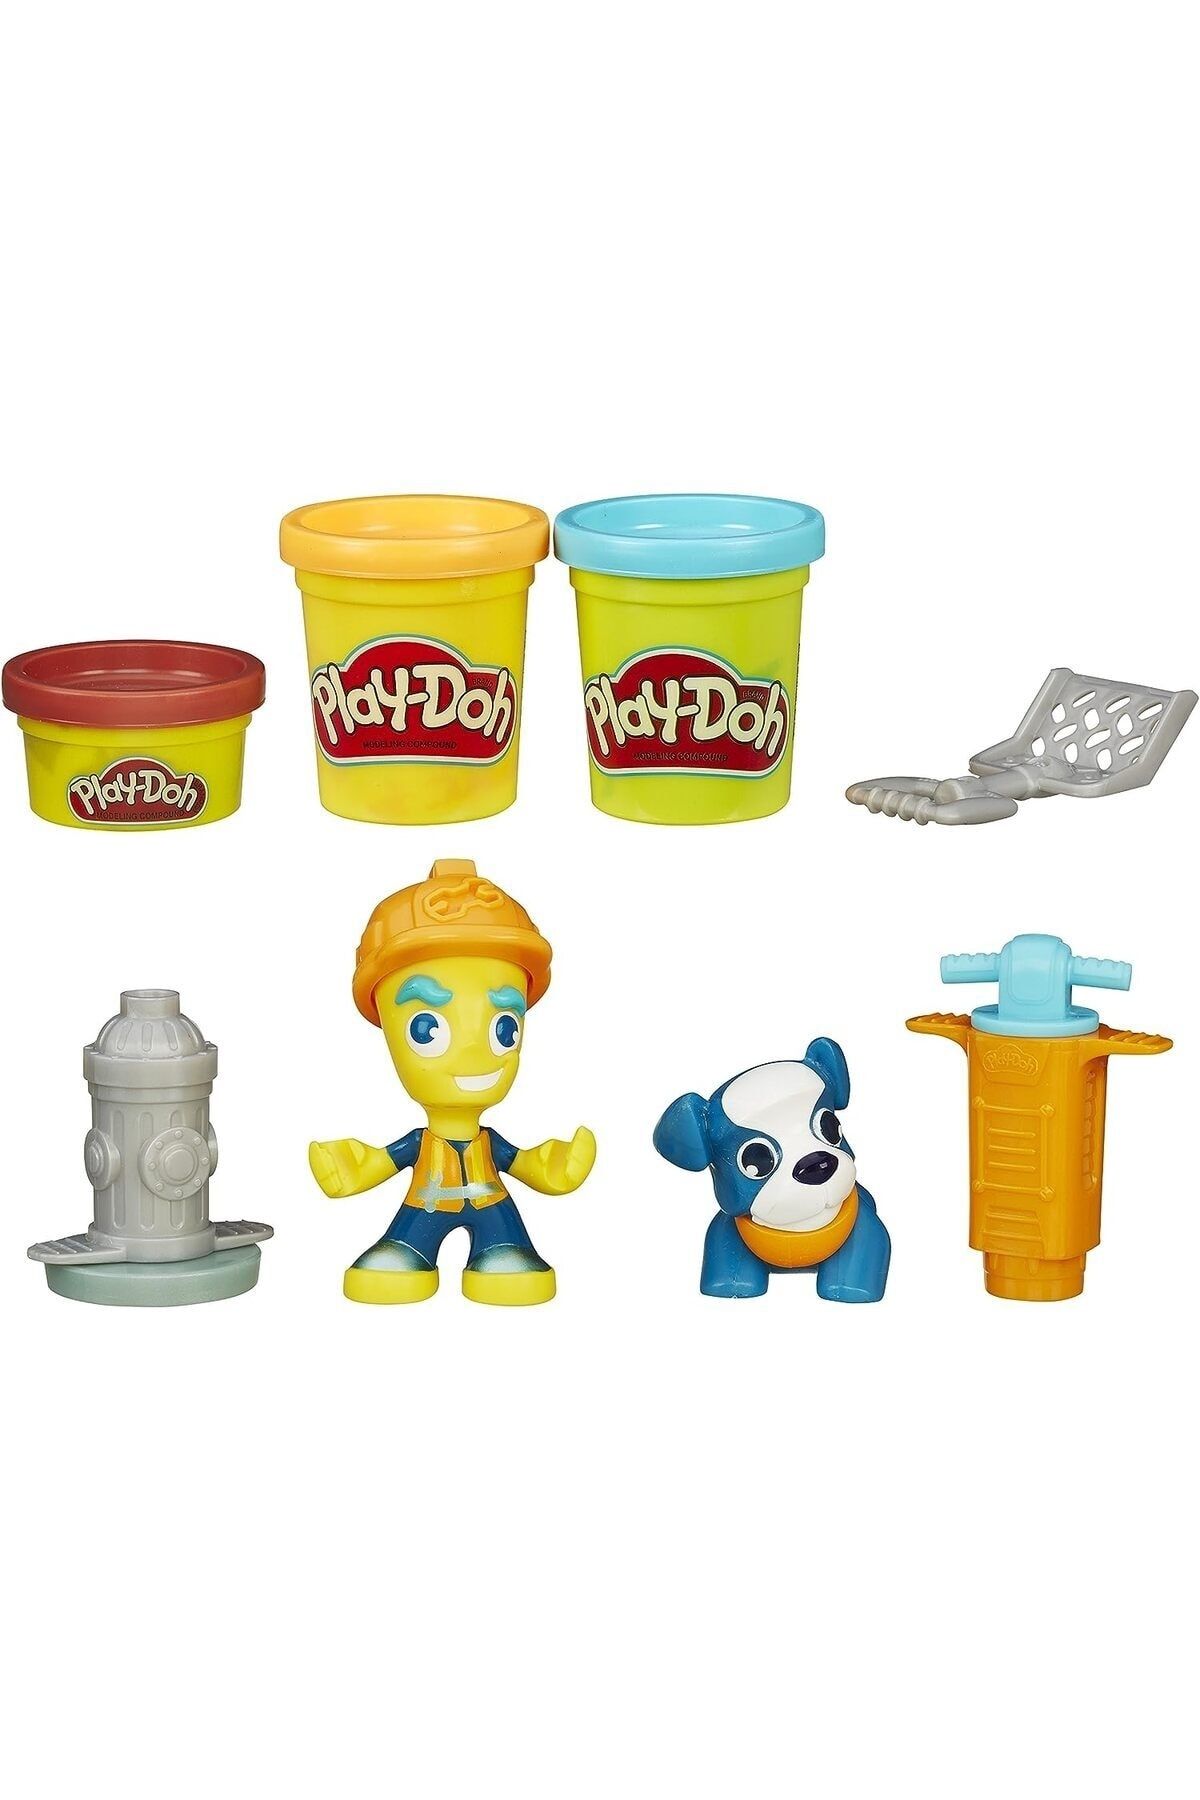 Hasbro Play-Doh Town Road Worker